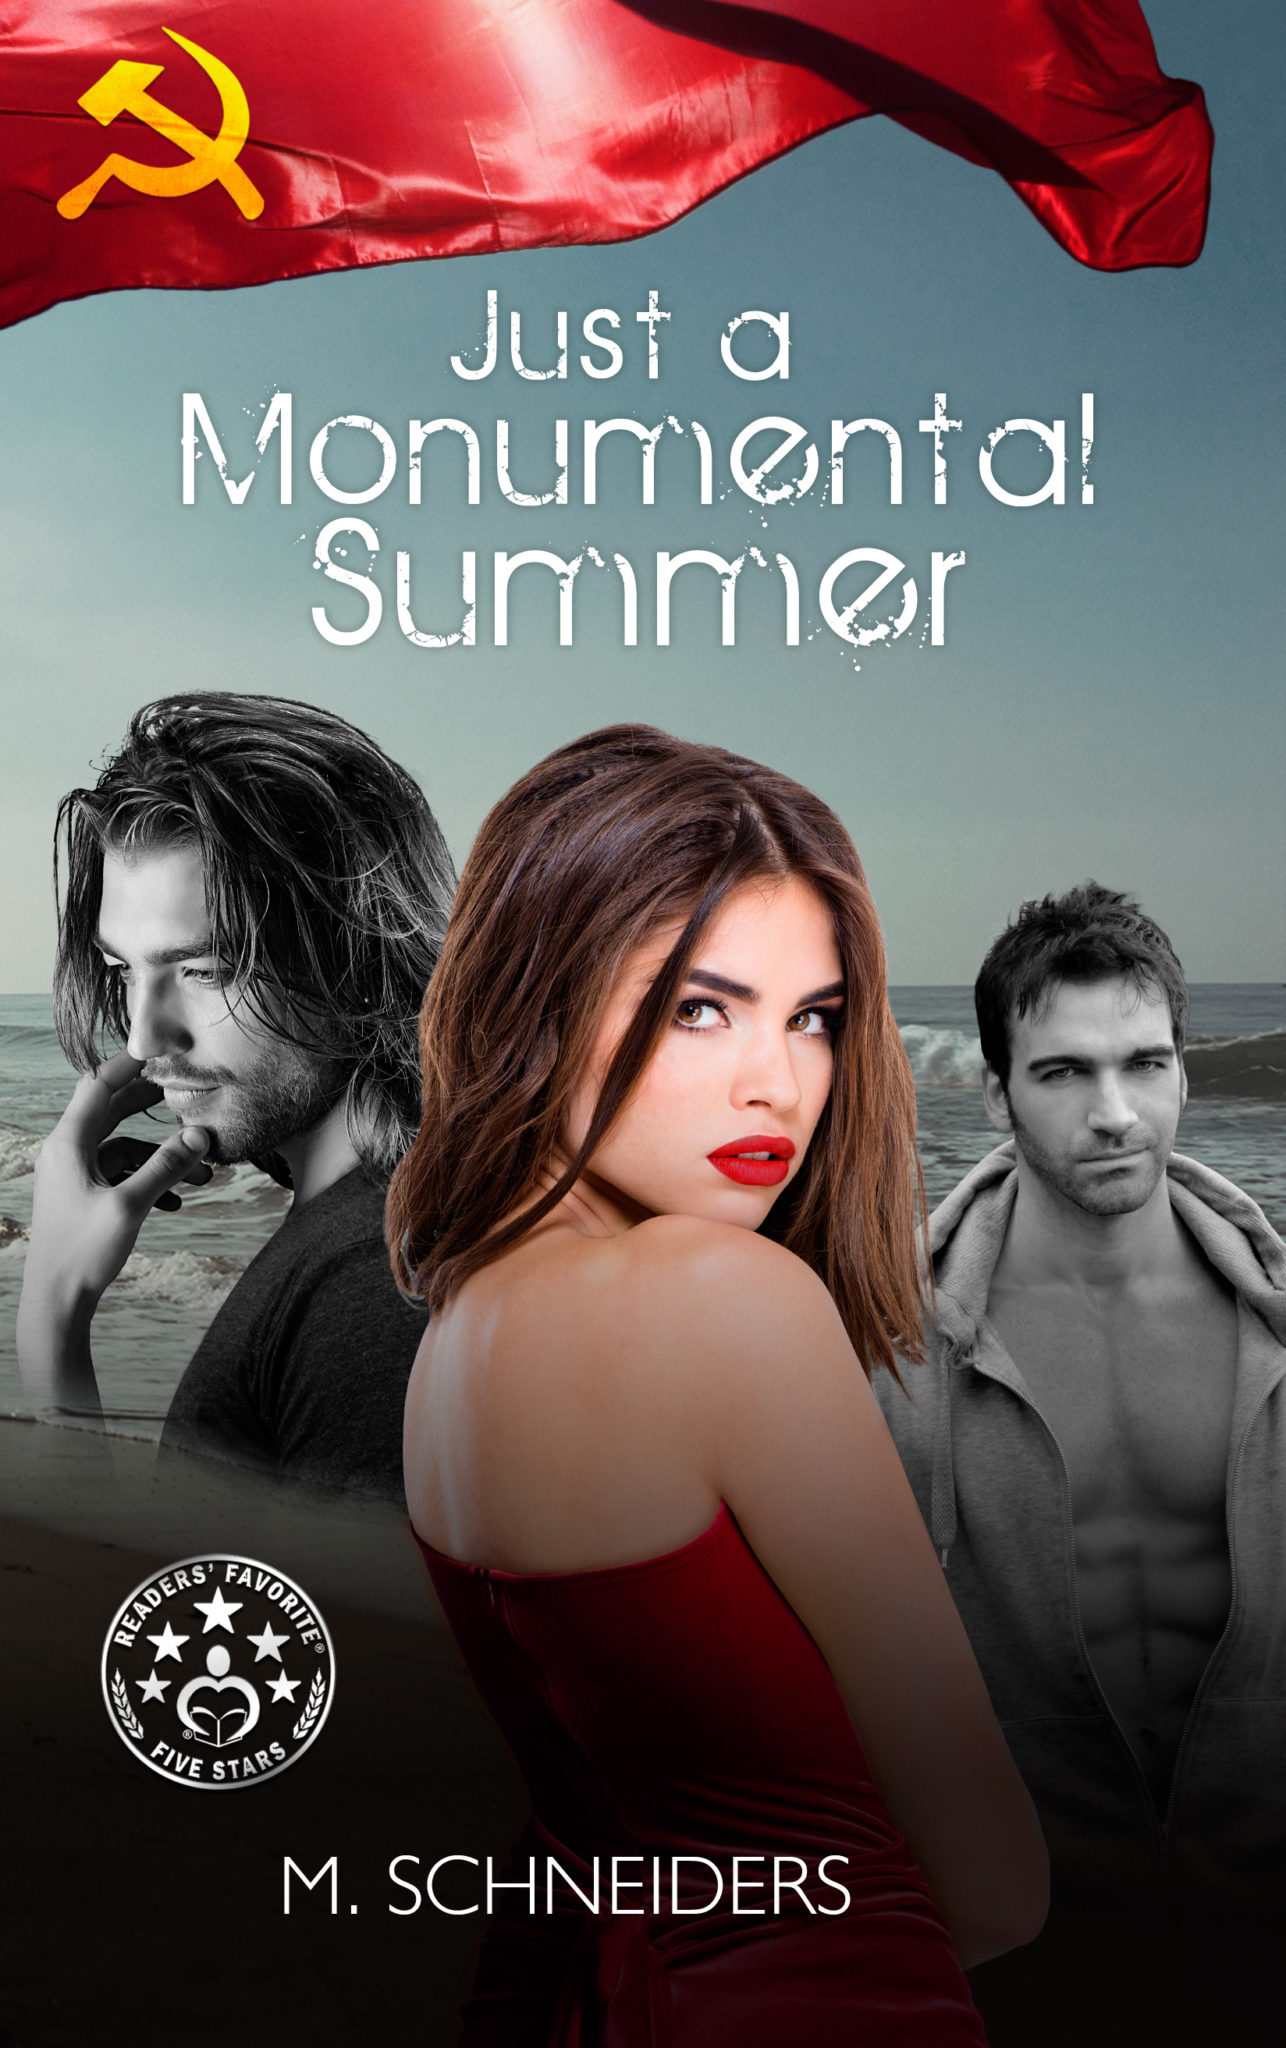 FREE: Just a Monumental Summer by M. Schneiders